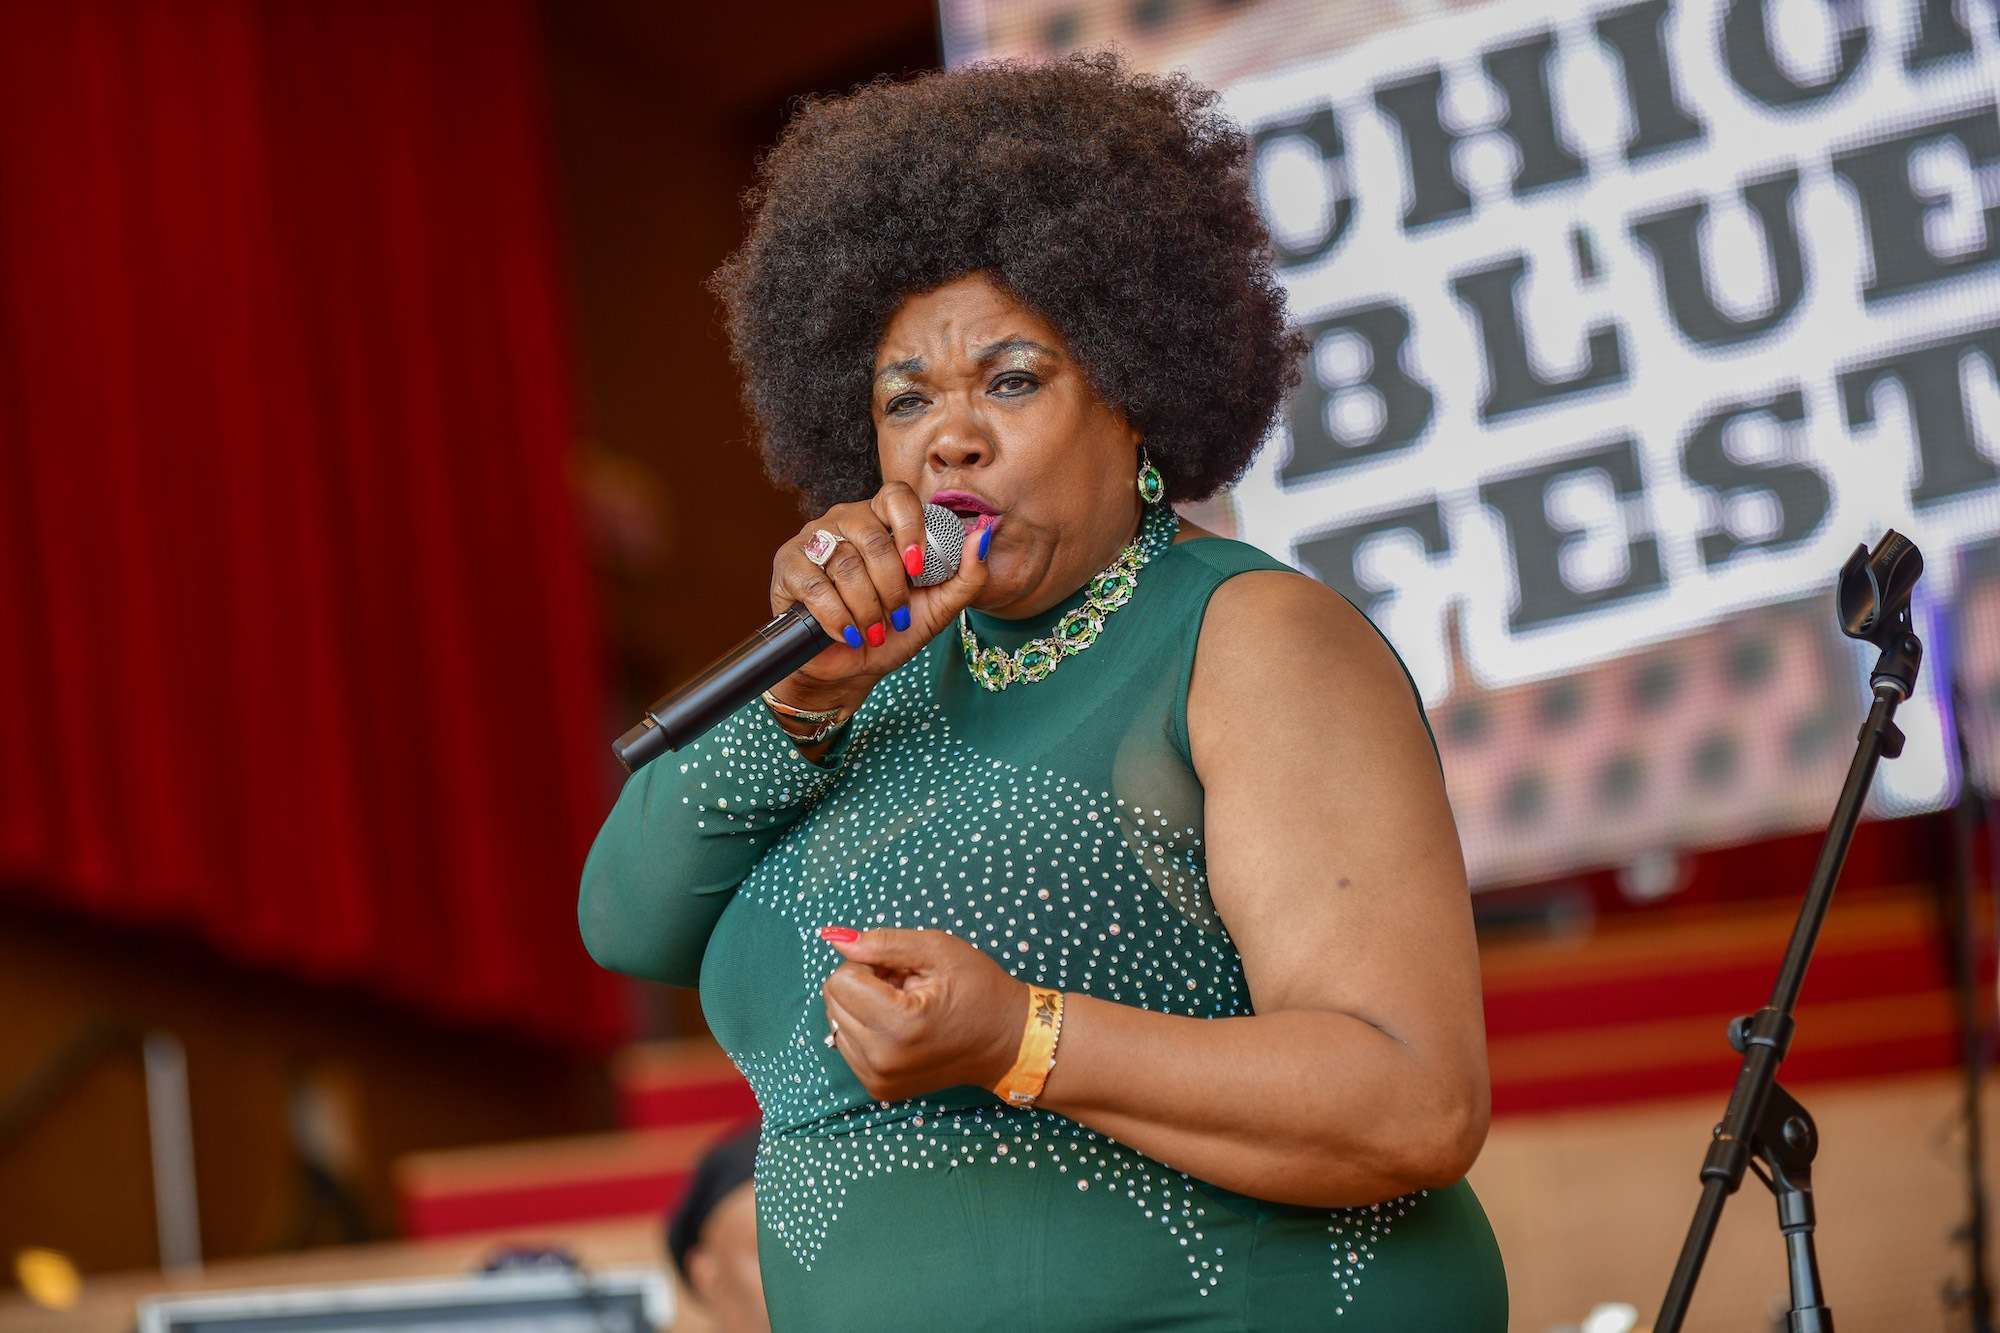 Women In Blues Live At Chicago Blues Fest [GALLERY] 8